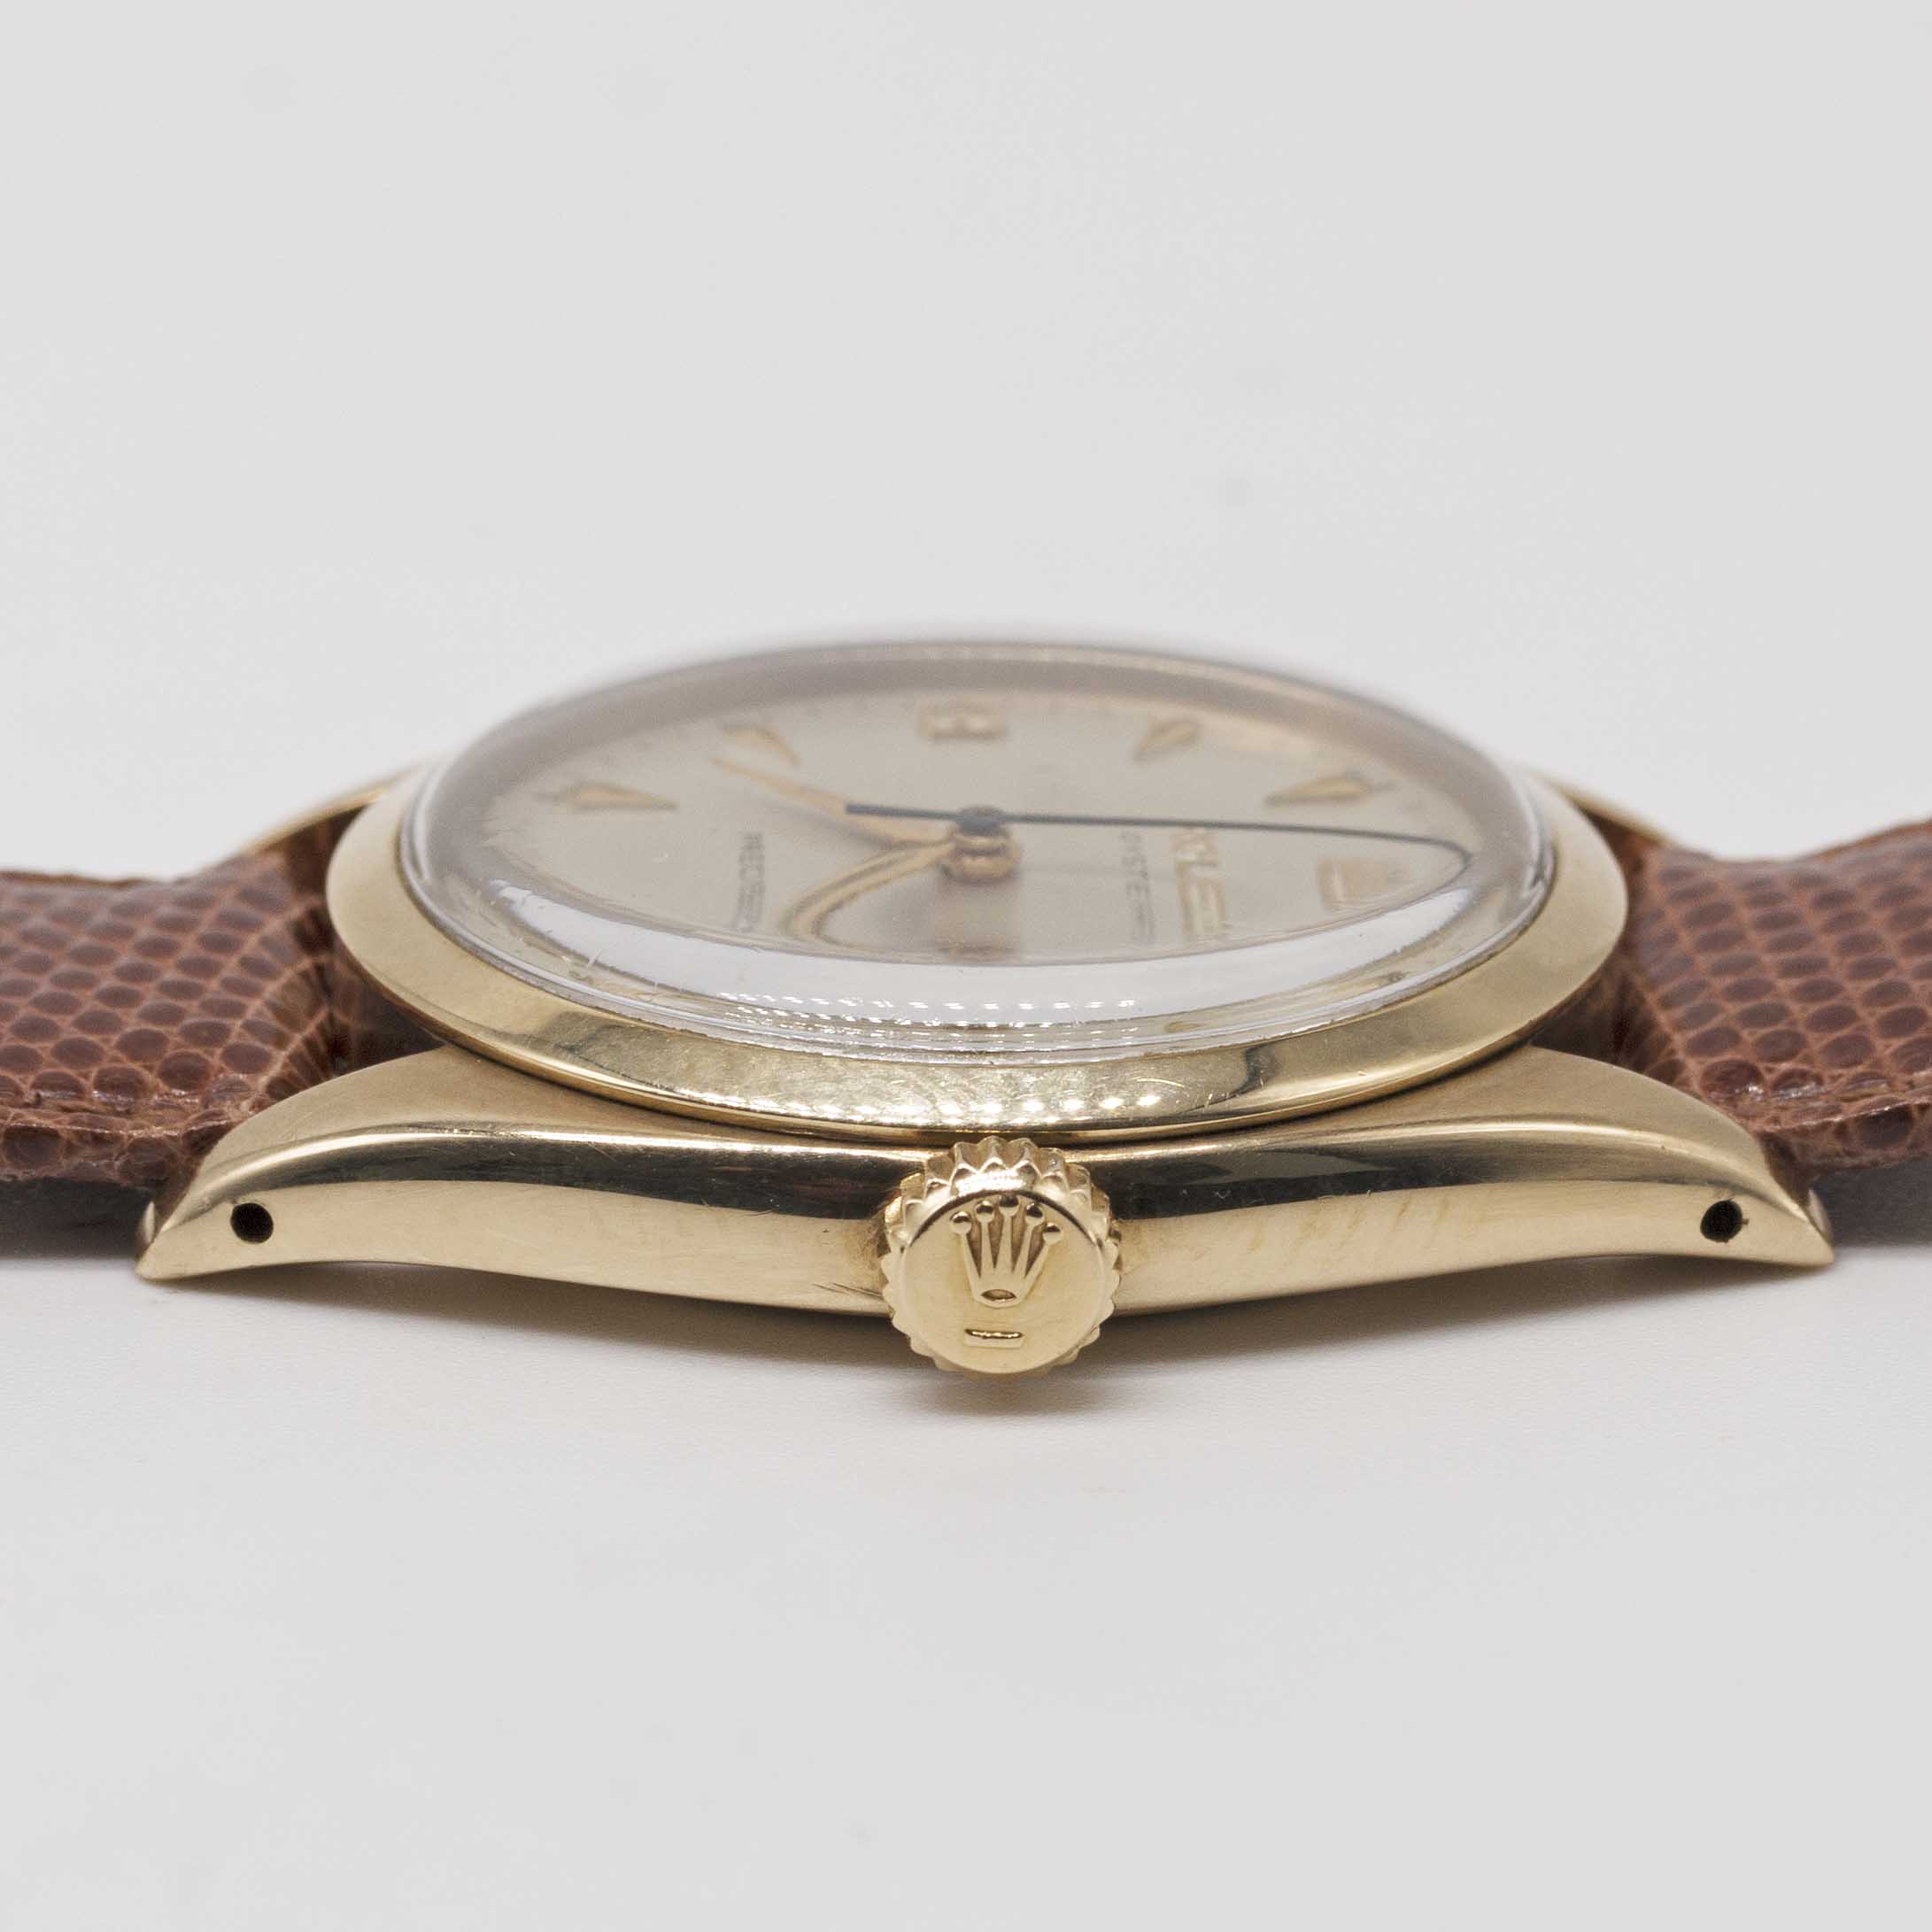 A GENTLEMAN'S 9CT SOLID GOLD ROLEX OYSTER PRECISION WRIST WATCH CIRCA 1959, REF. 6426 WITH 3-6-9 " - Image 7 of 8